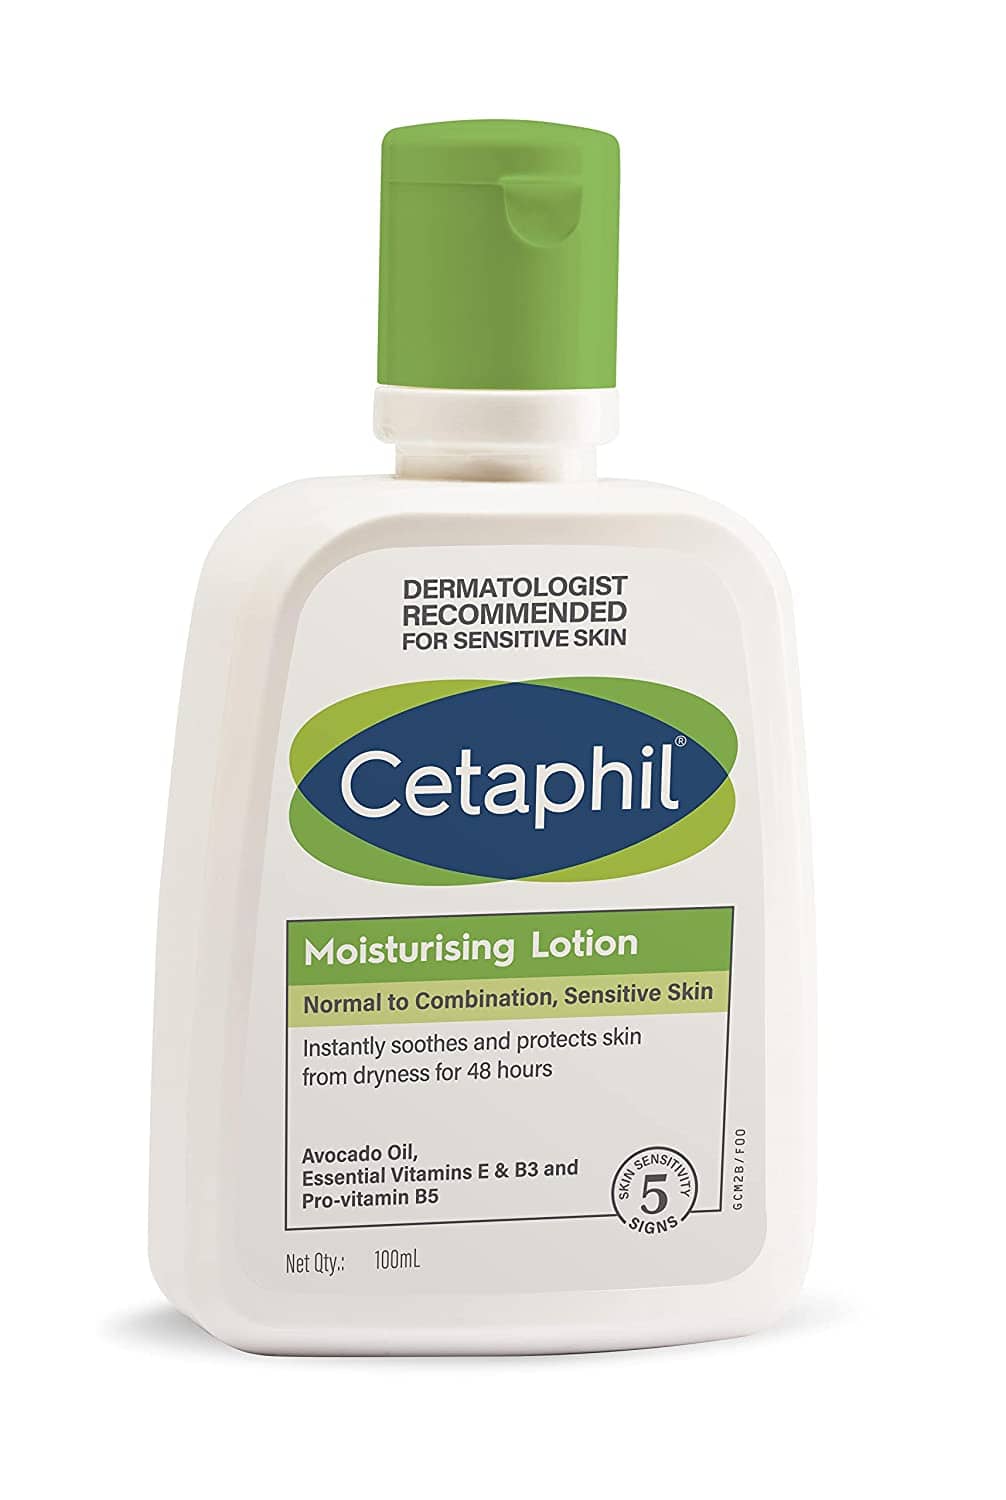 Cetaphil Moisturizing Lotion for Normal to Combination Sensitive Skin